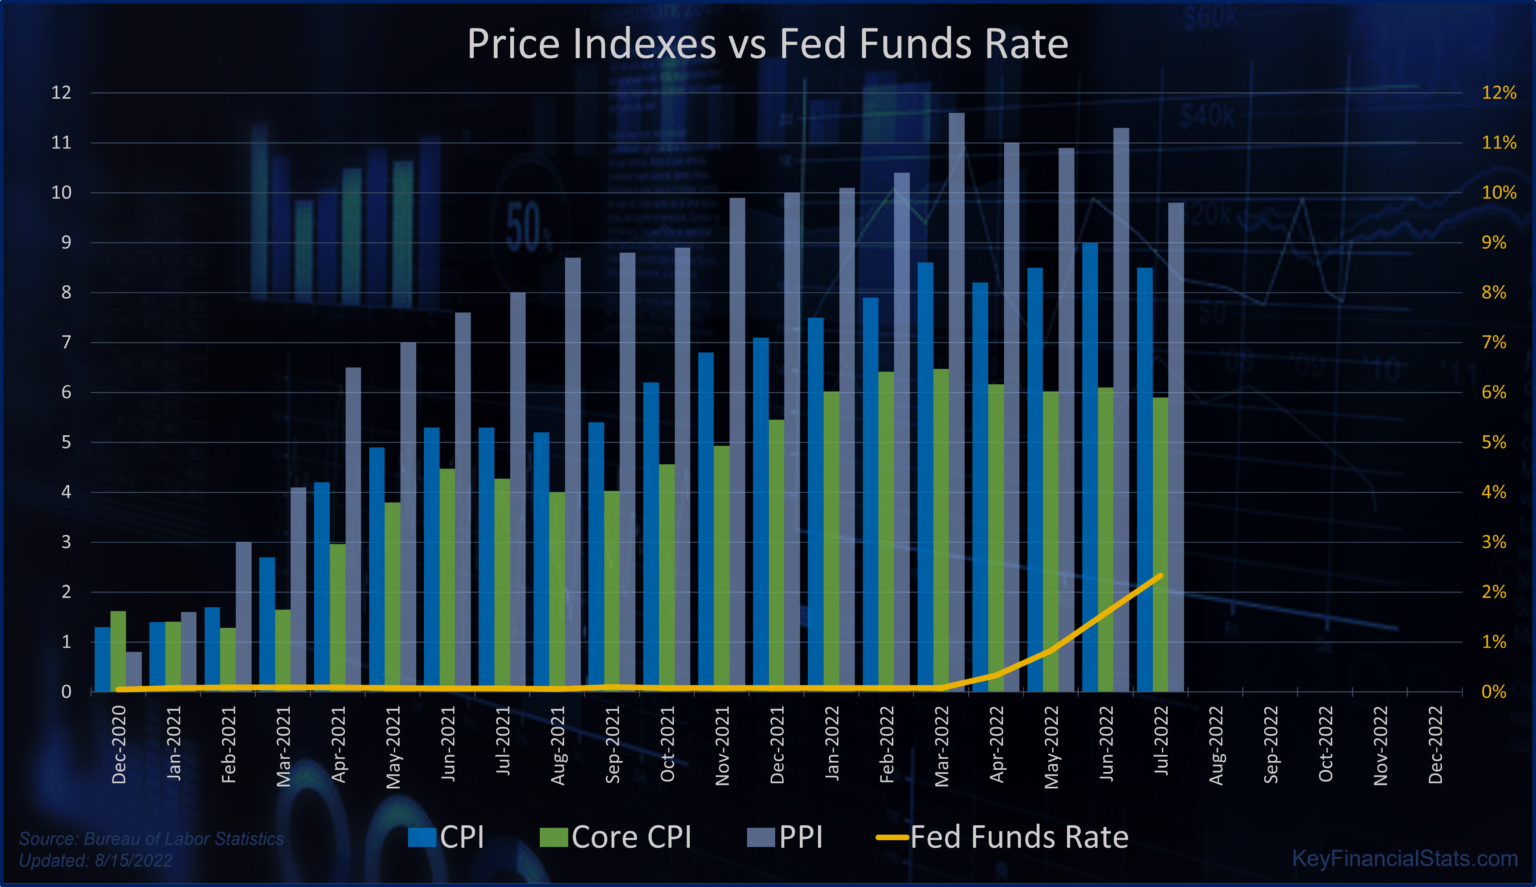 Latest CPI Data and Fed Funds Rate (Aug’22) Life Decades